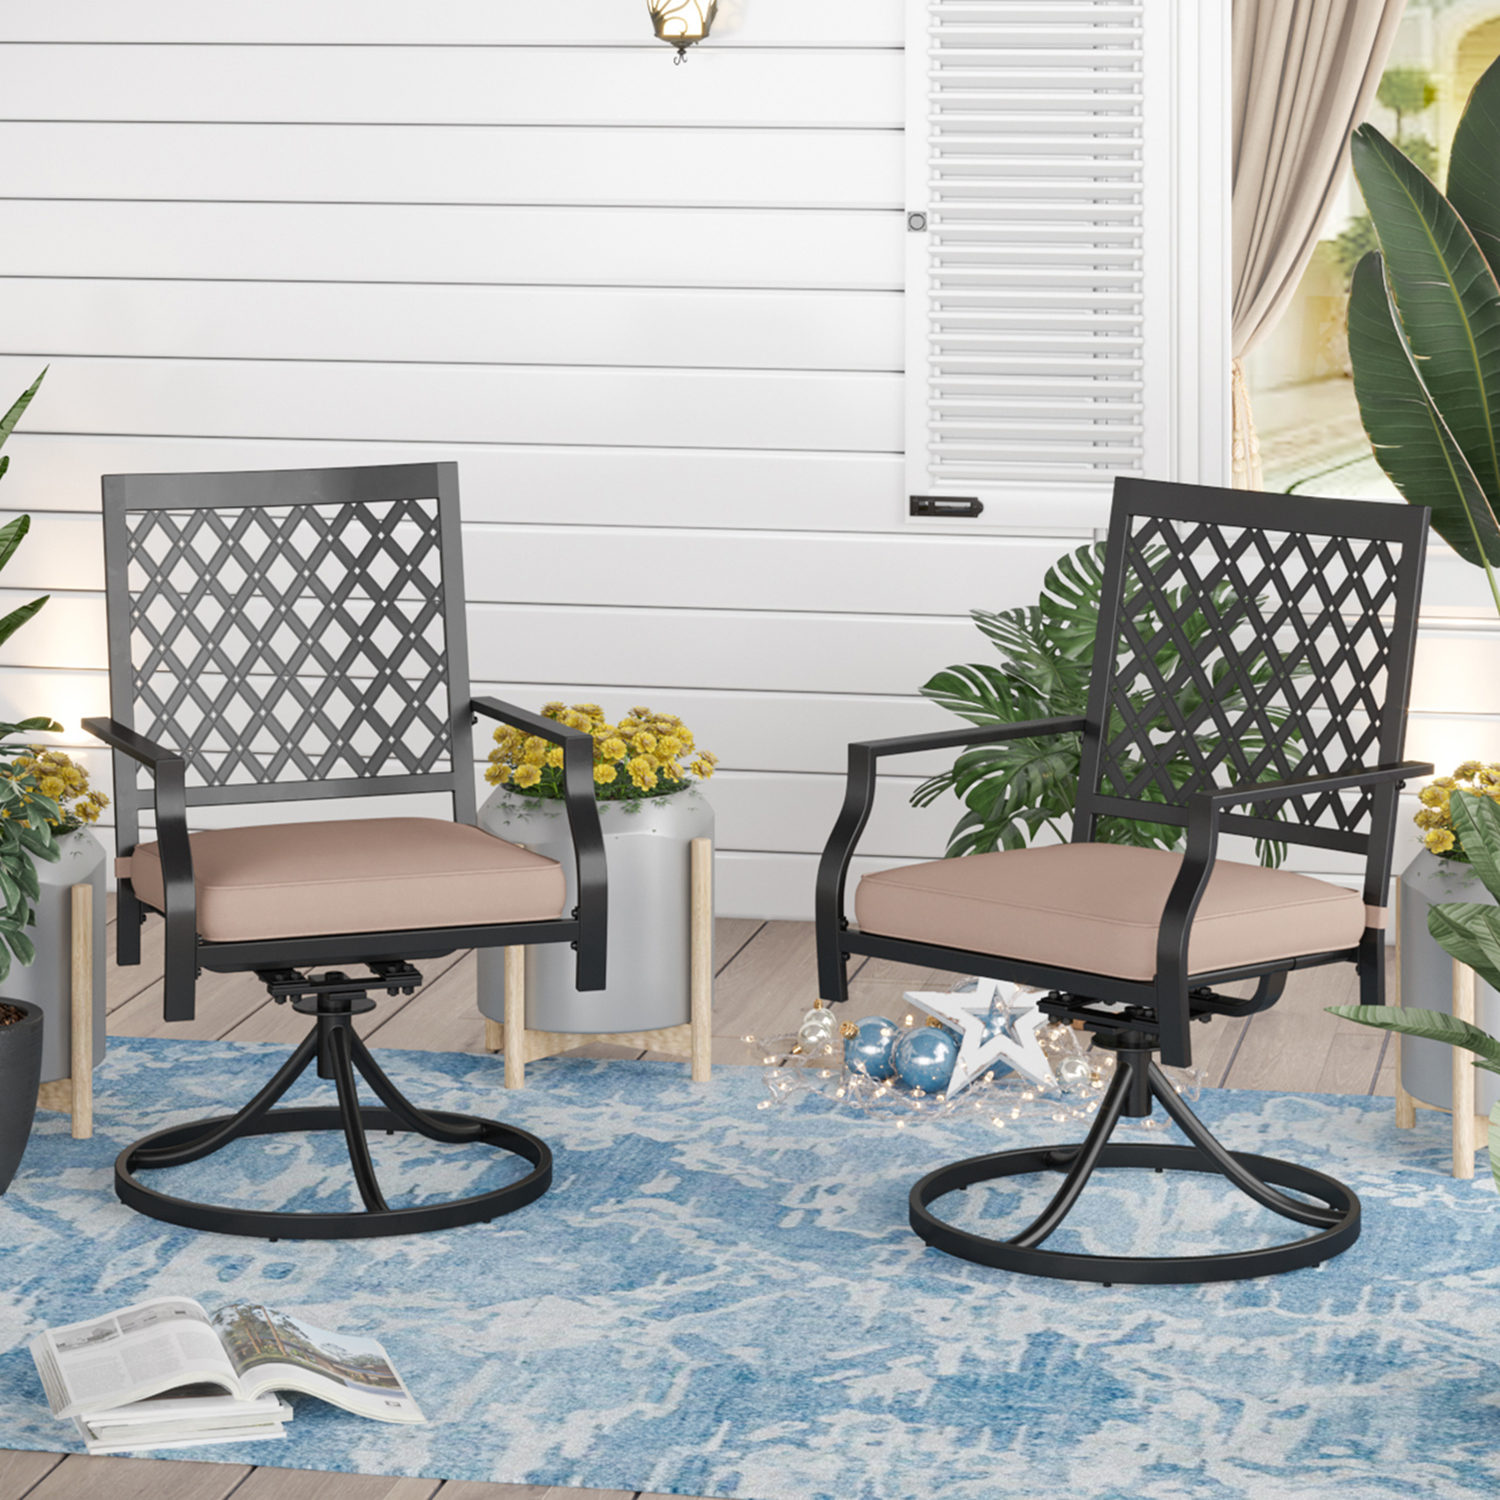 Sophia & William Set of 2 Outdoor Patio Dining Chairs Metal Swivel Chairs with Beige Cushions - image 1 of 6